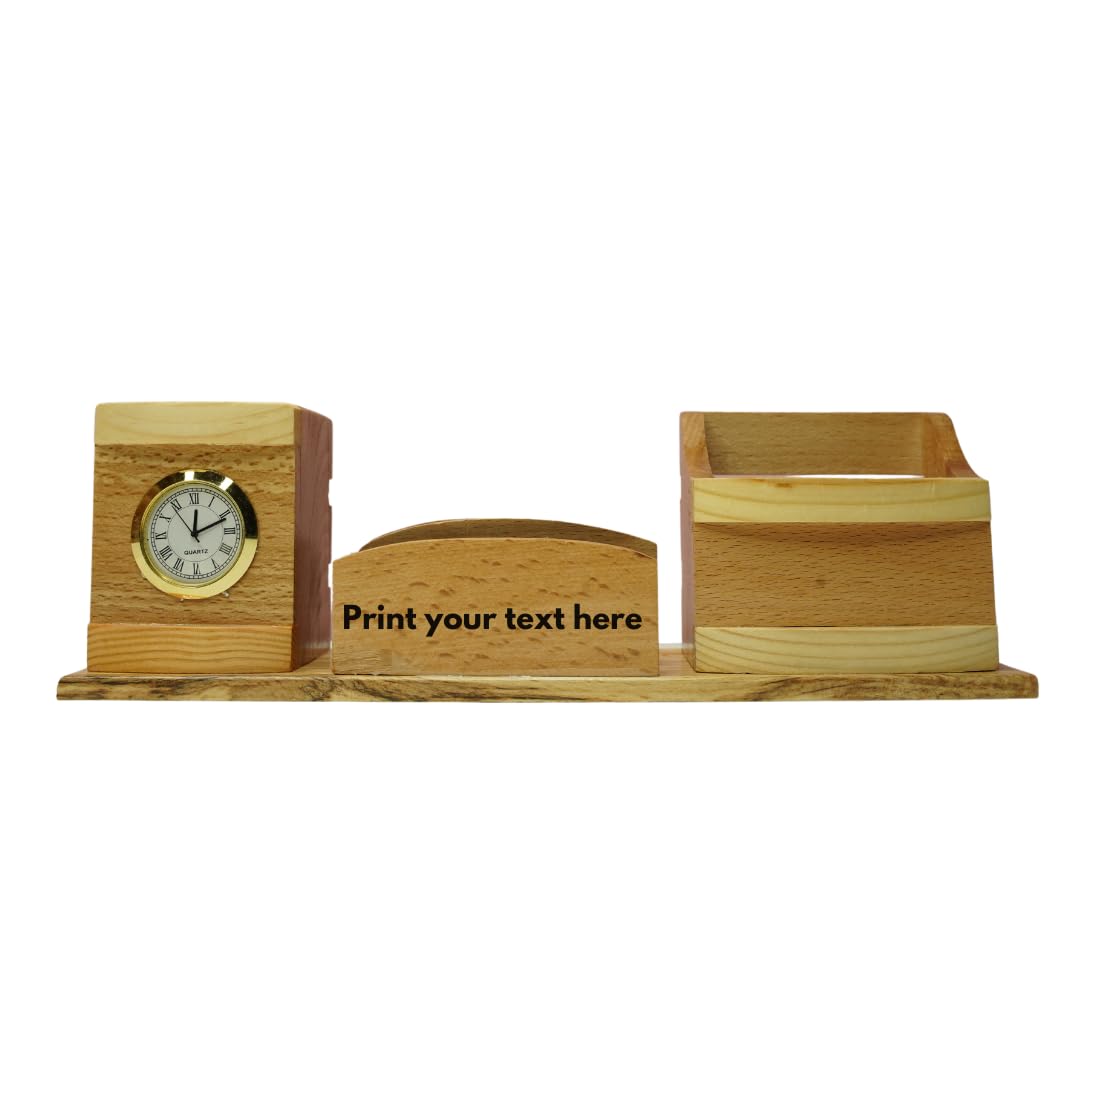 Craft Closet & Gifts - Steam Beech Wood Pencil/Pen Stand Holder with Mobile and Card Holder + Clock - Design 1 - Personalized Office Accessory for IAS, Advocate, Office & Corporate Gifts